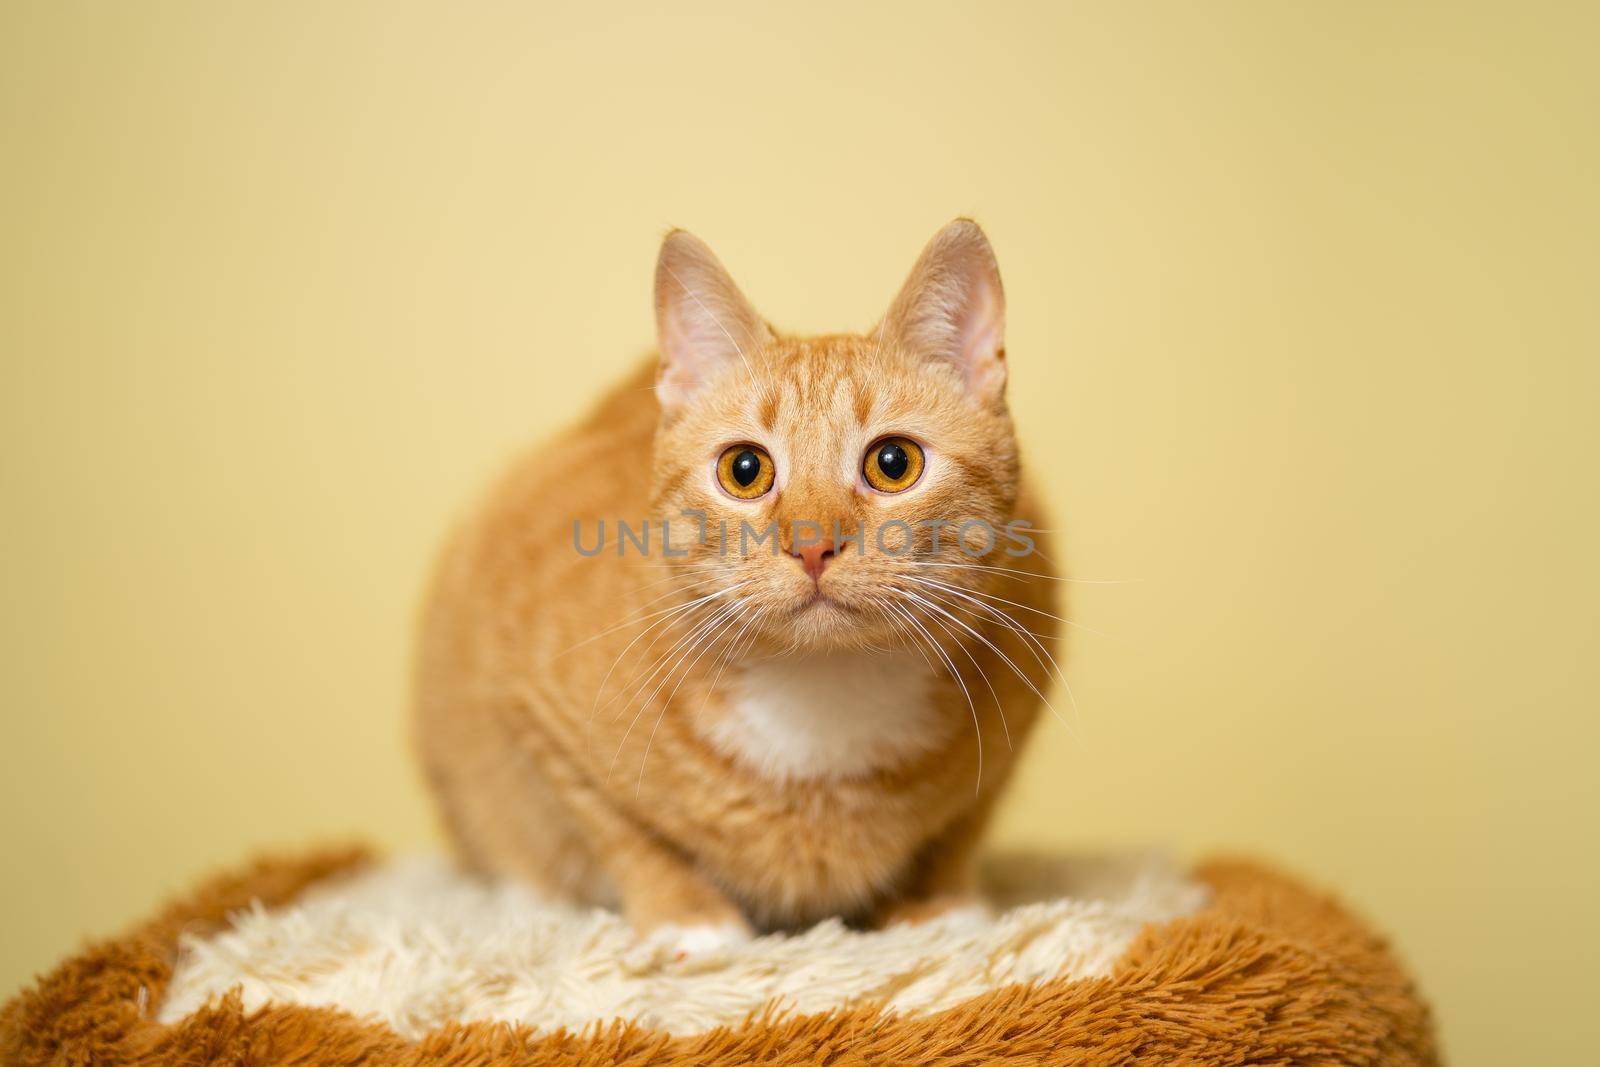 Cute Ginger tabby cat on yellow background. Red fluffy friend. Domestic cute pet. Animal and pet concept. An adult red cat sits posing on a stool in the studio against the background of a yellow wall.